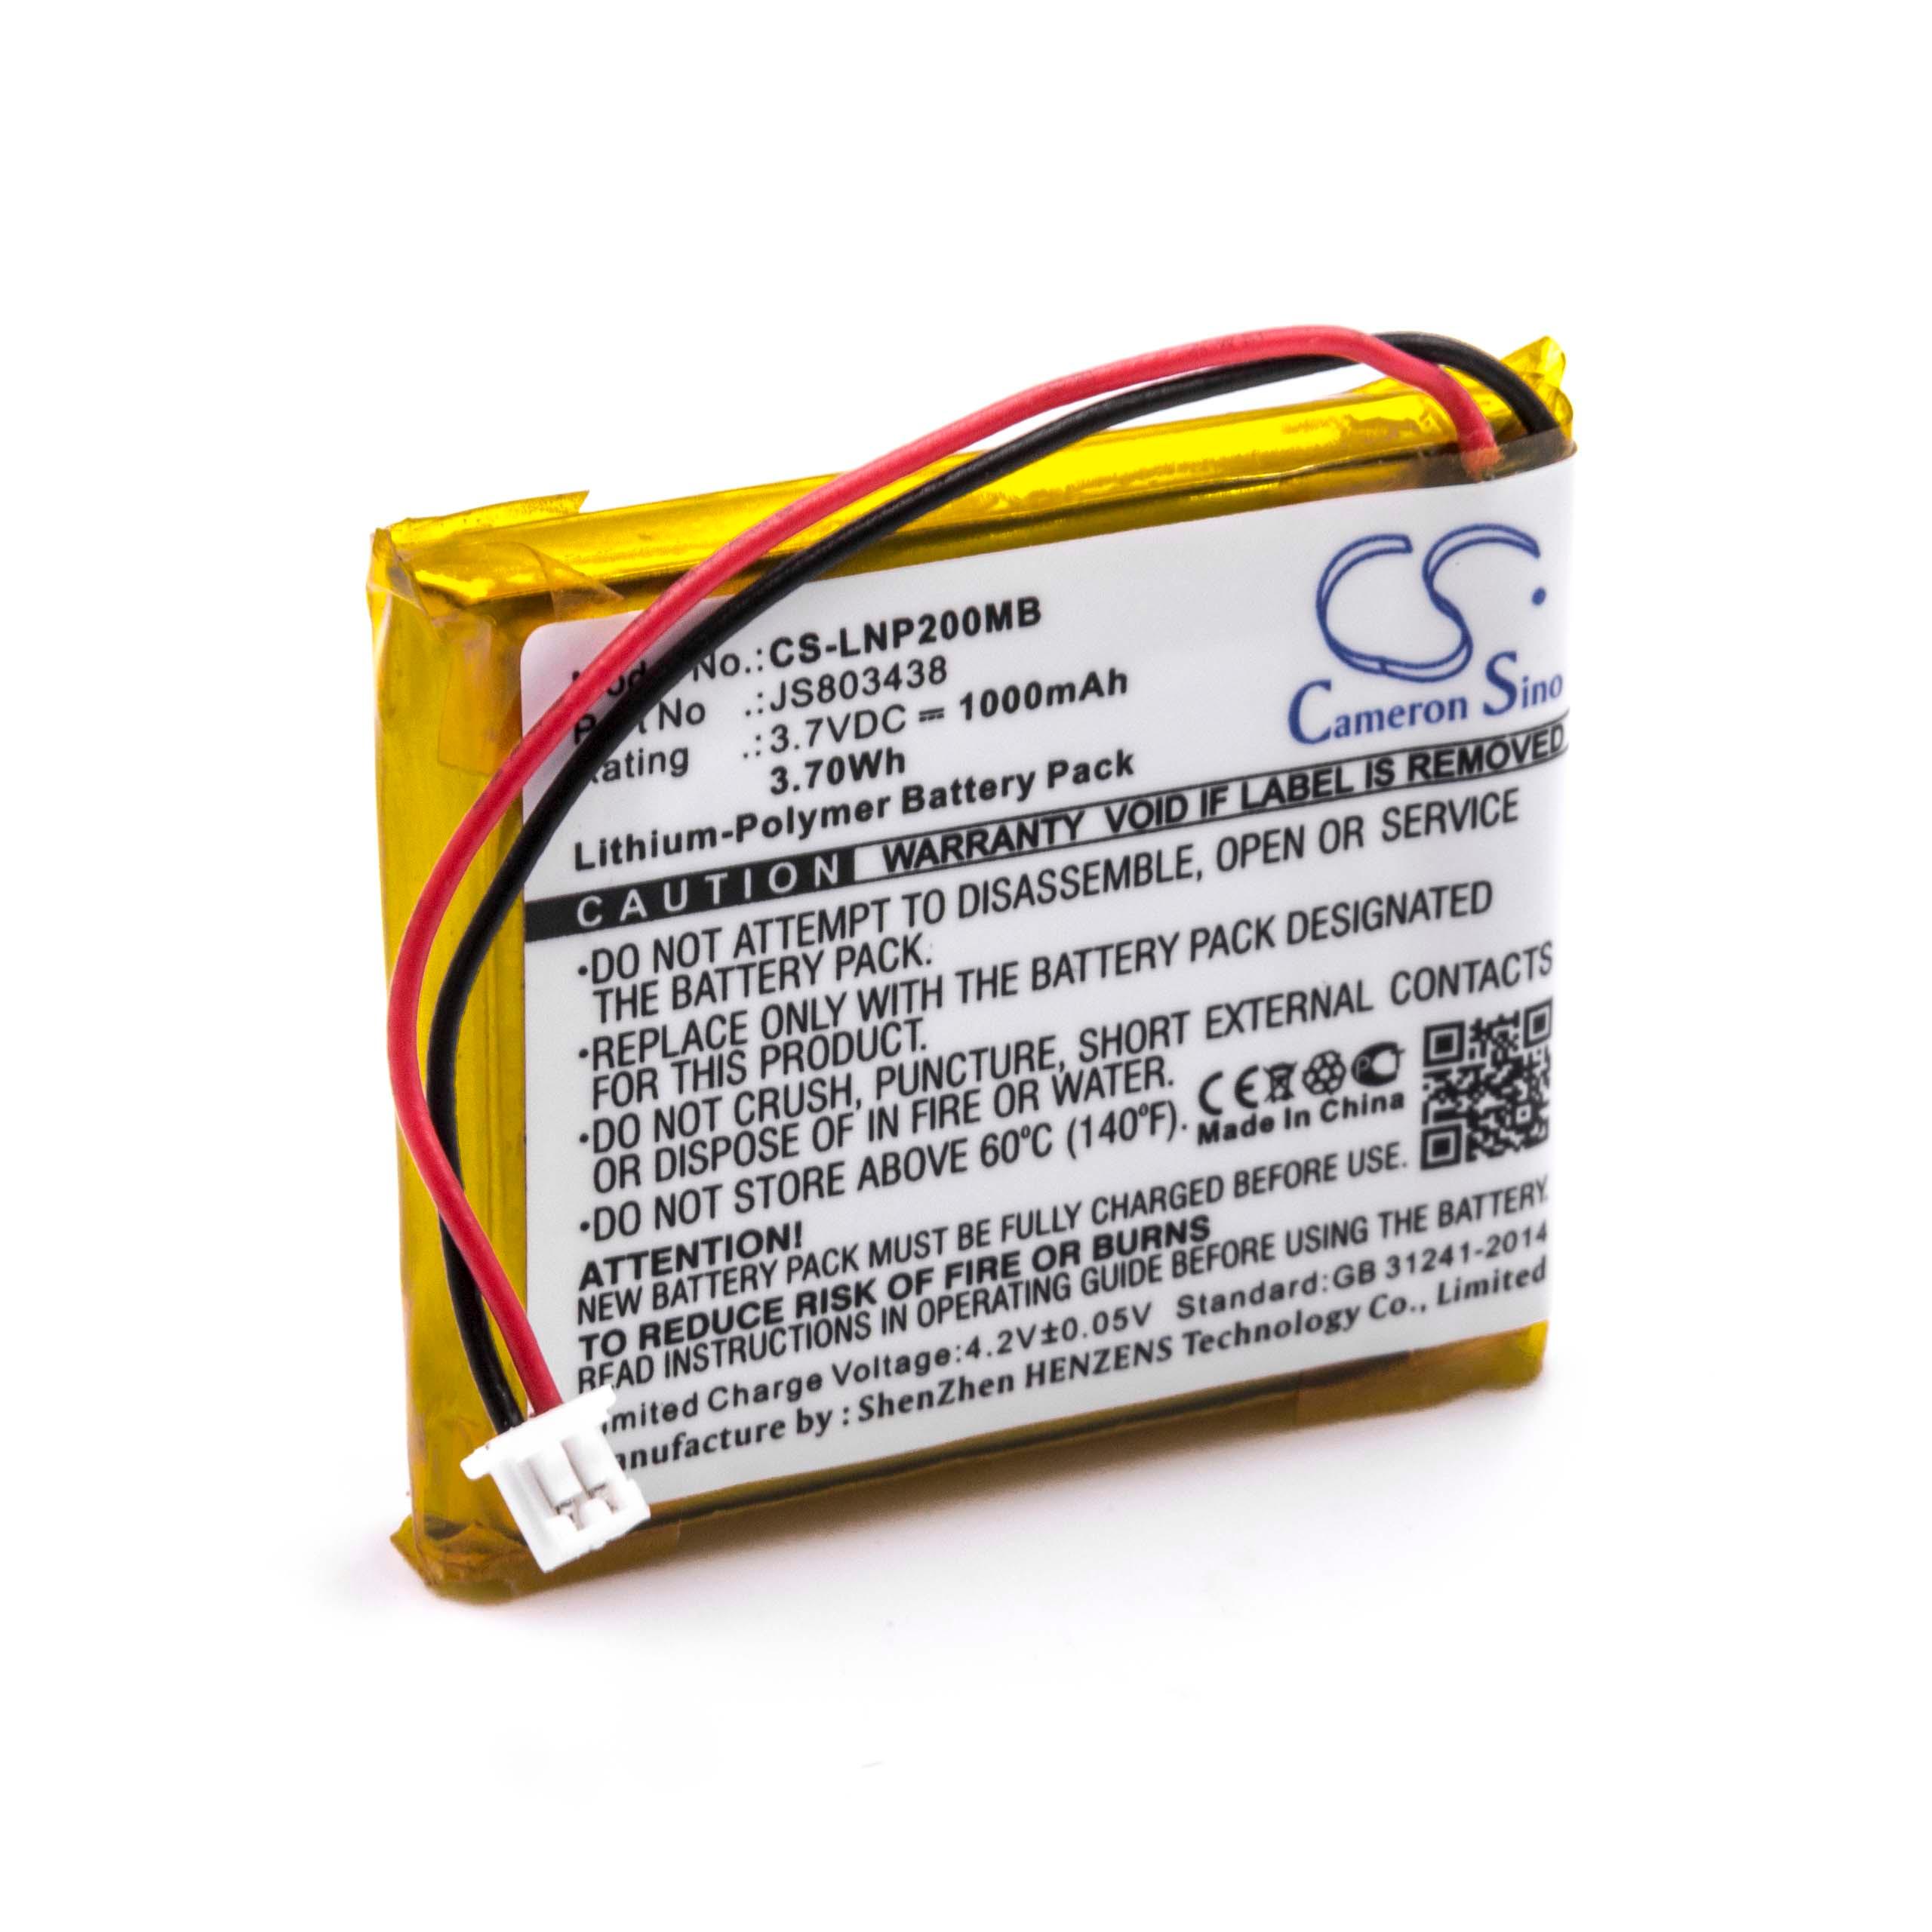 Baby Monitor Battery Replacement for Luvion JS803438 - 1000mAh 3.7V Li-polymer